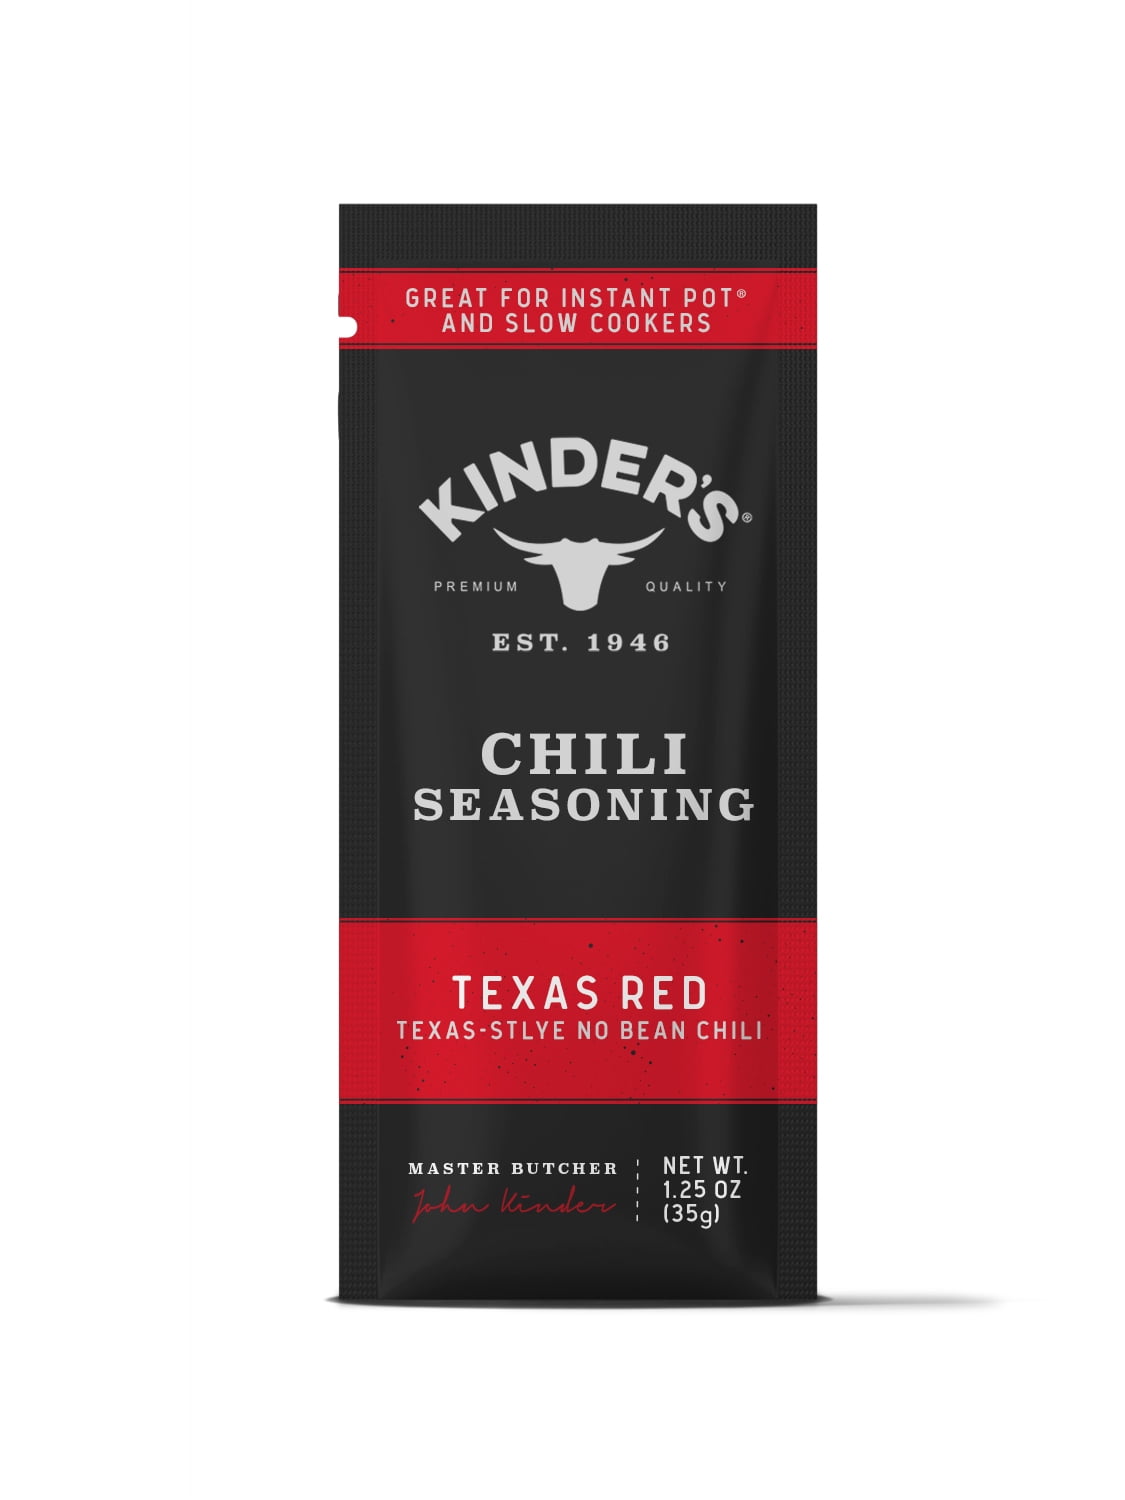 Twisted Pepper Lone Star Chili Mix Is A Scrumptious Chili Mix You Can't Pass Up. Authentic Texas Style Chili, All Natural, No MSG, Gluten Free. Low So